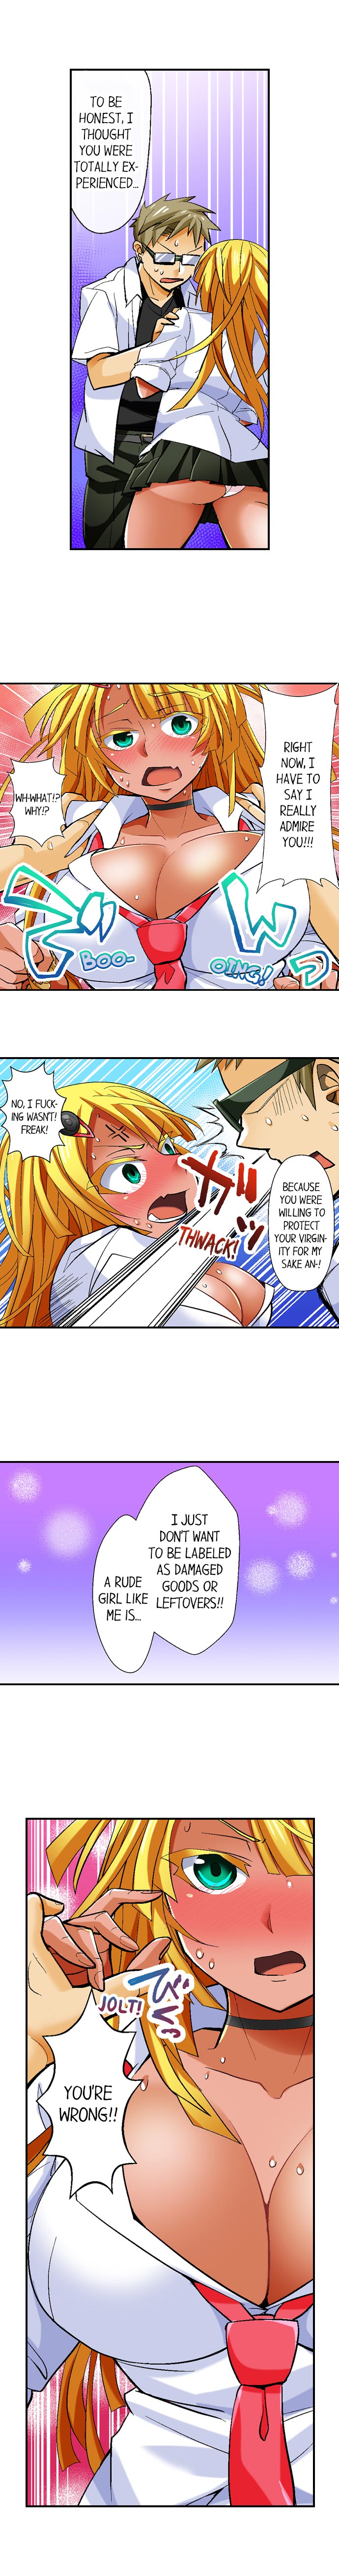 Sex With a Tanned Girl in a Bathhouse - Chapter 7 Page 8